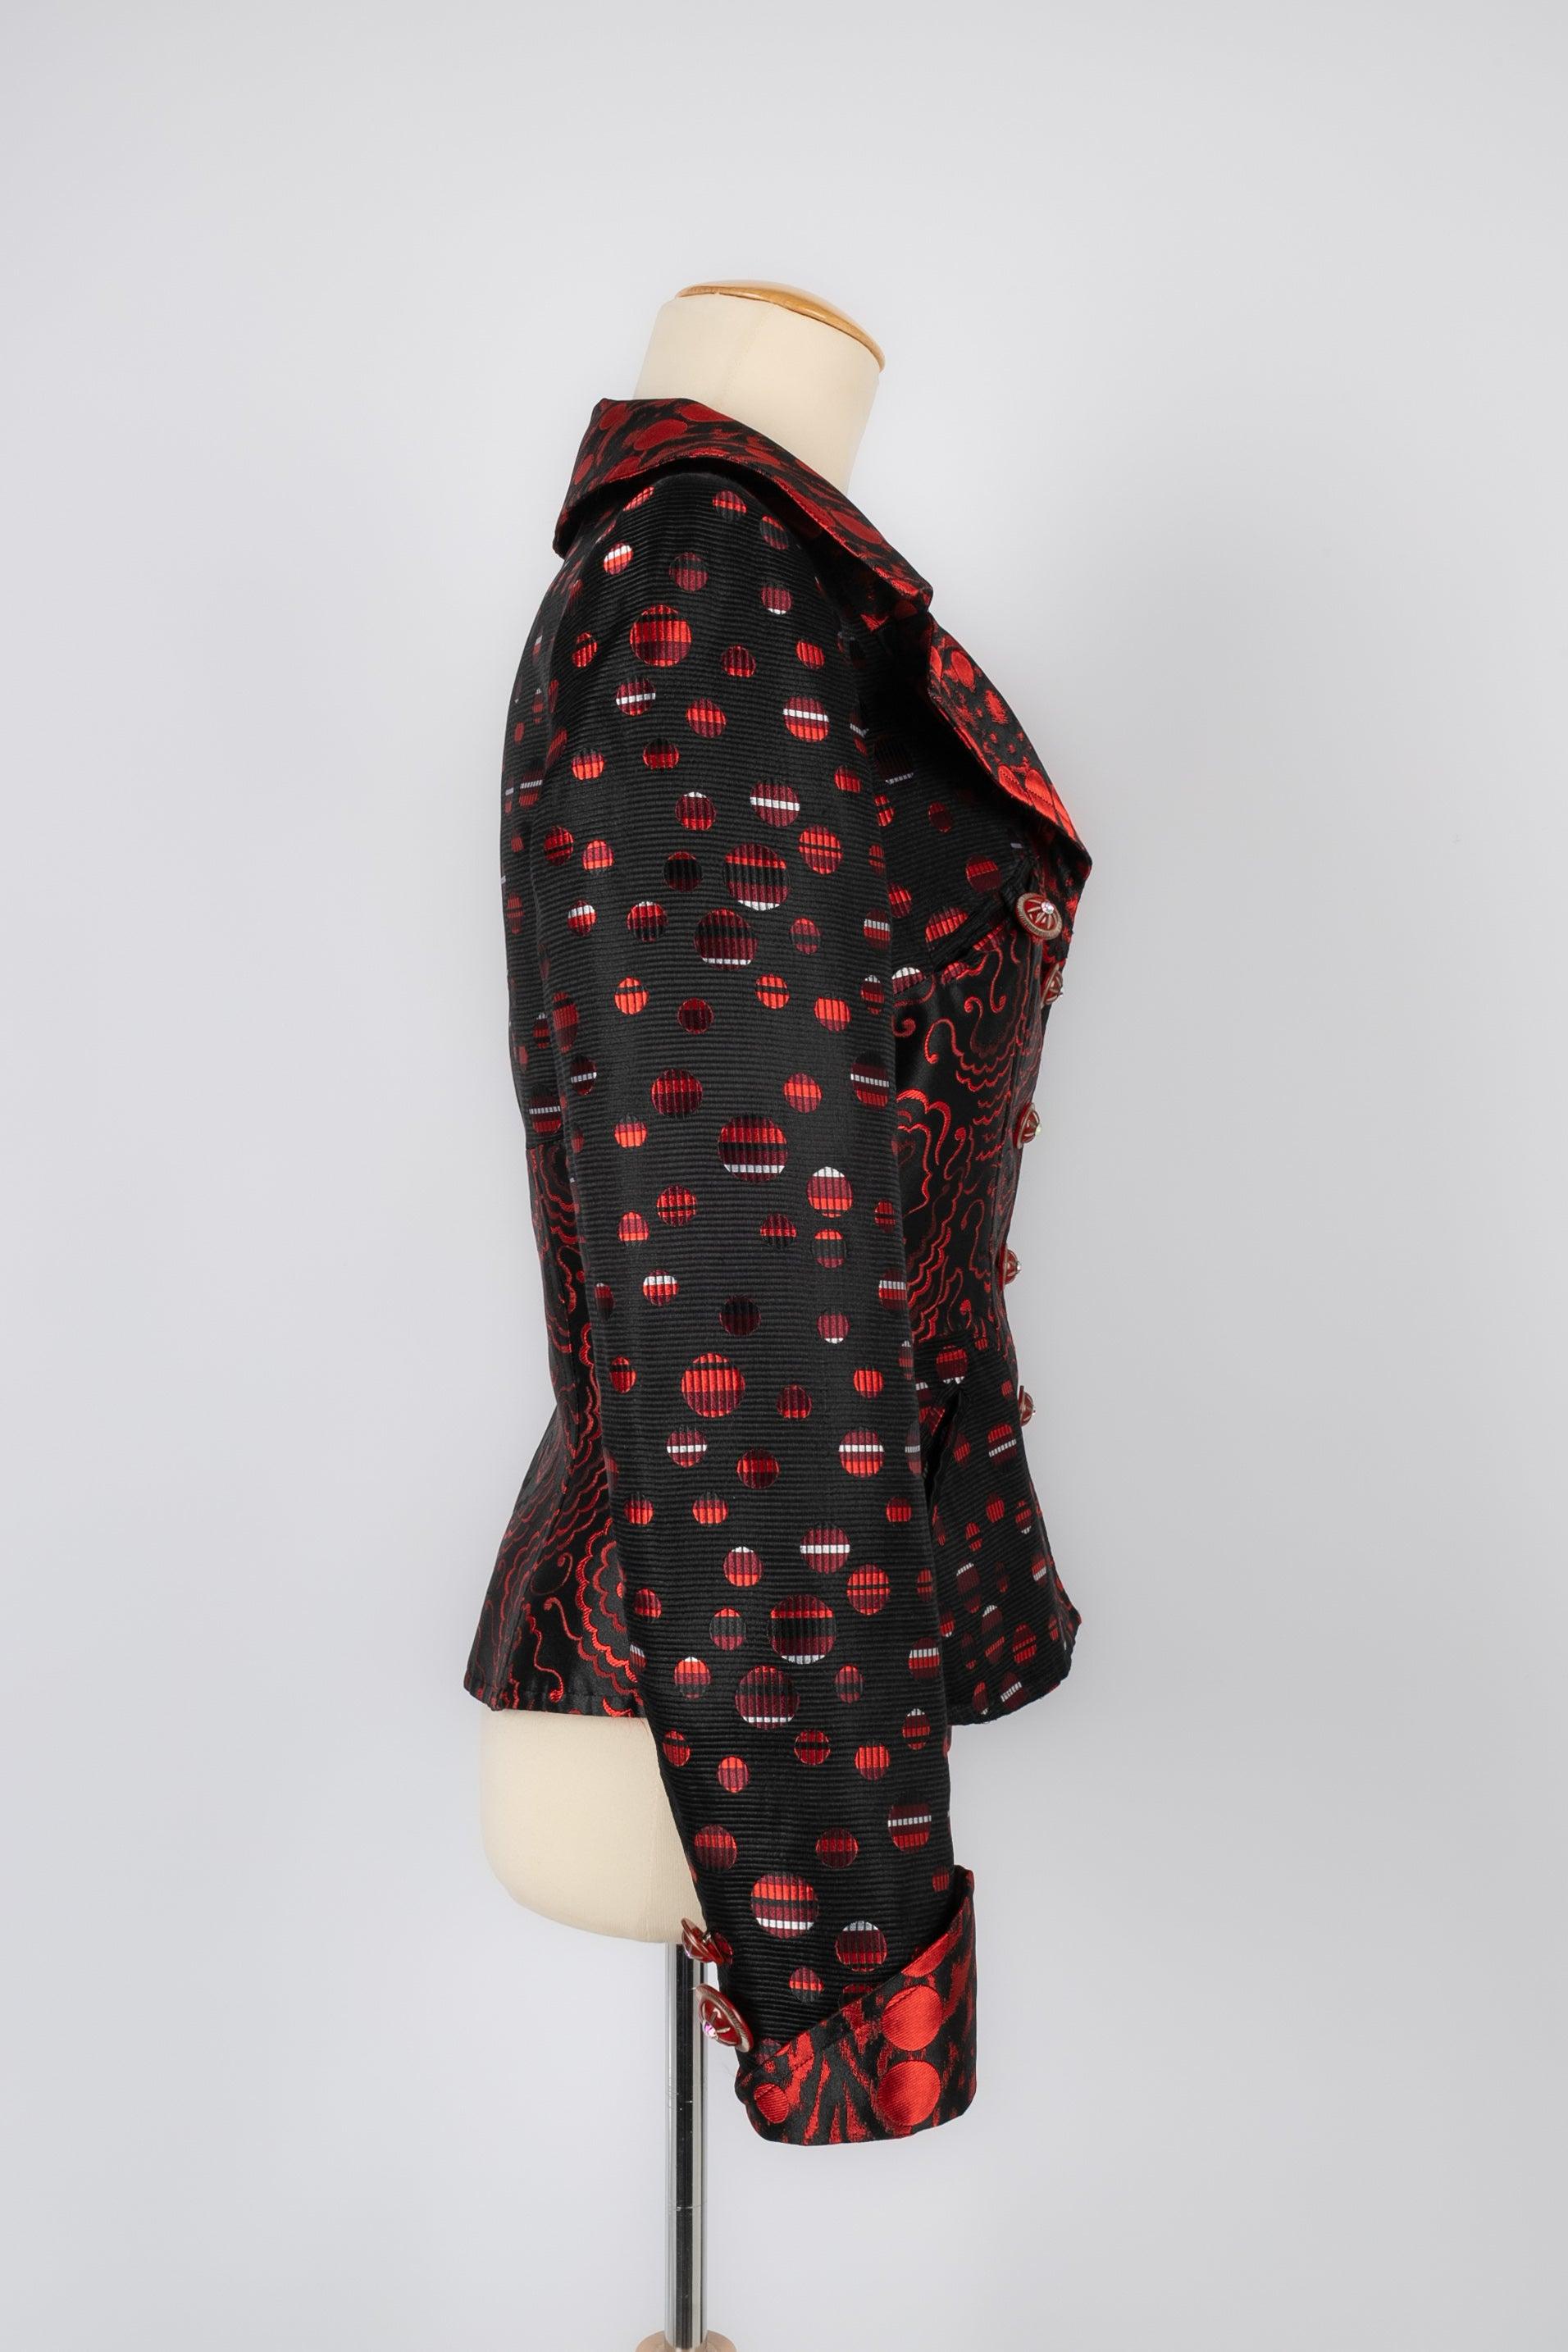 Women's Christian Lacroix Silk Jacket in Black and Red Tones